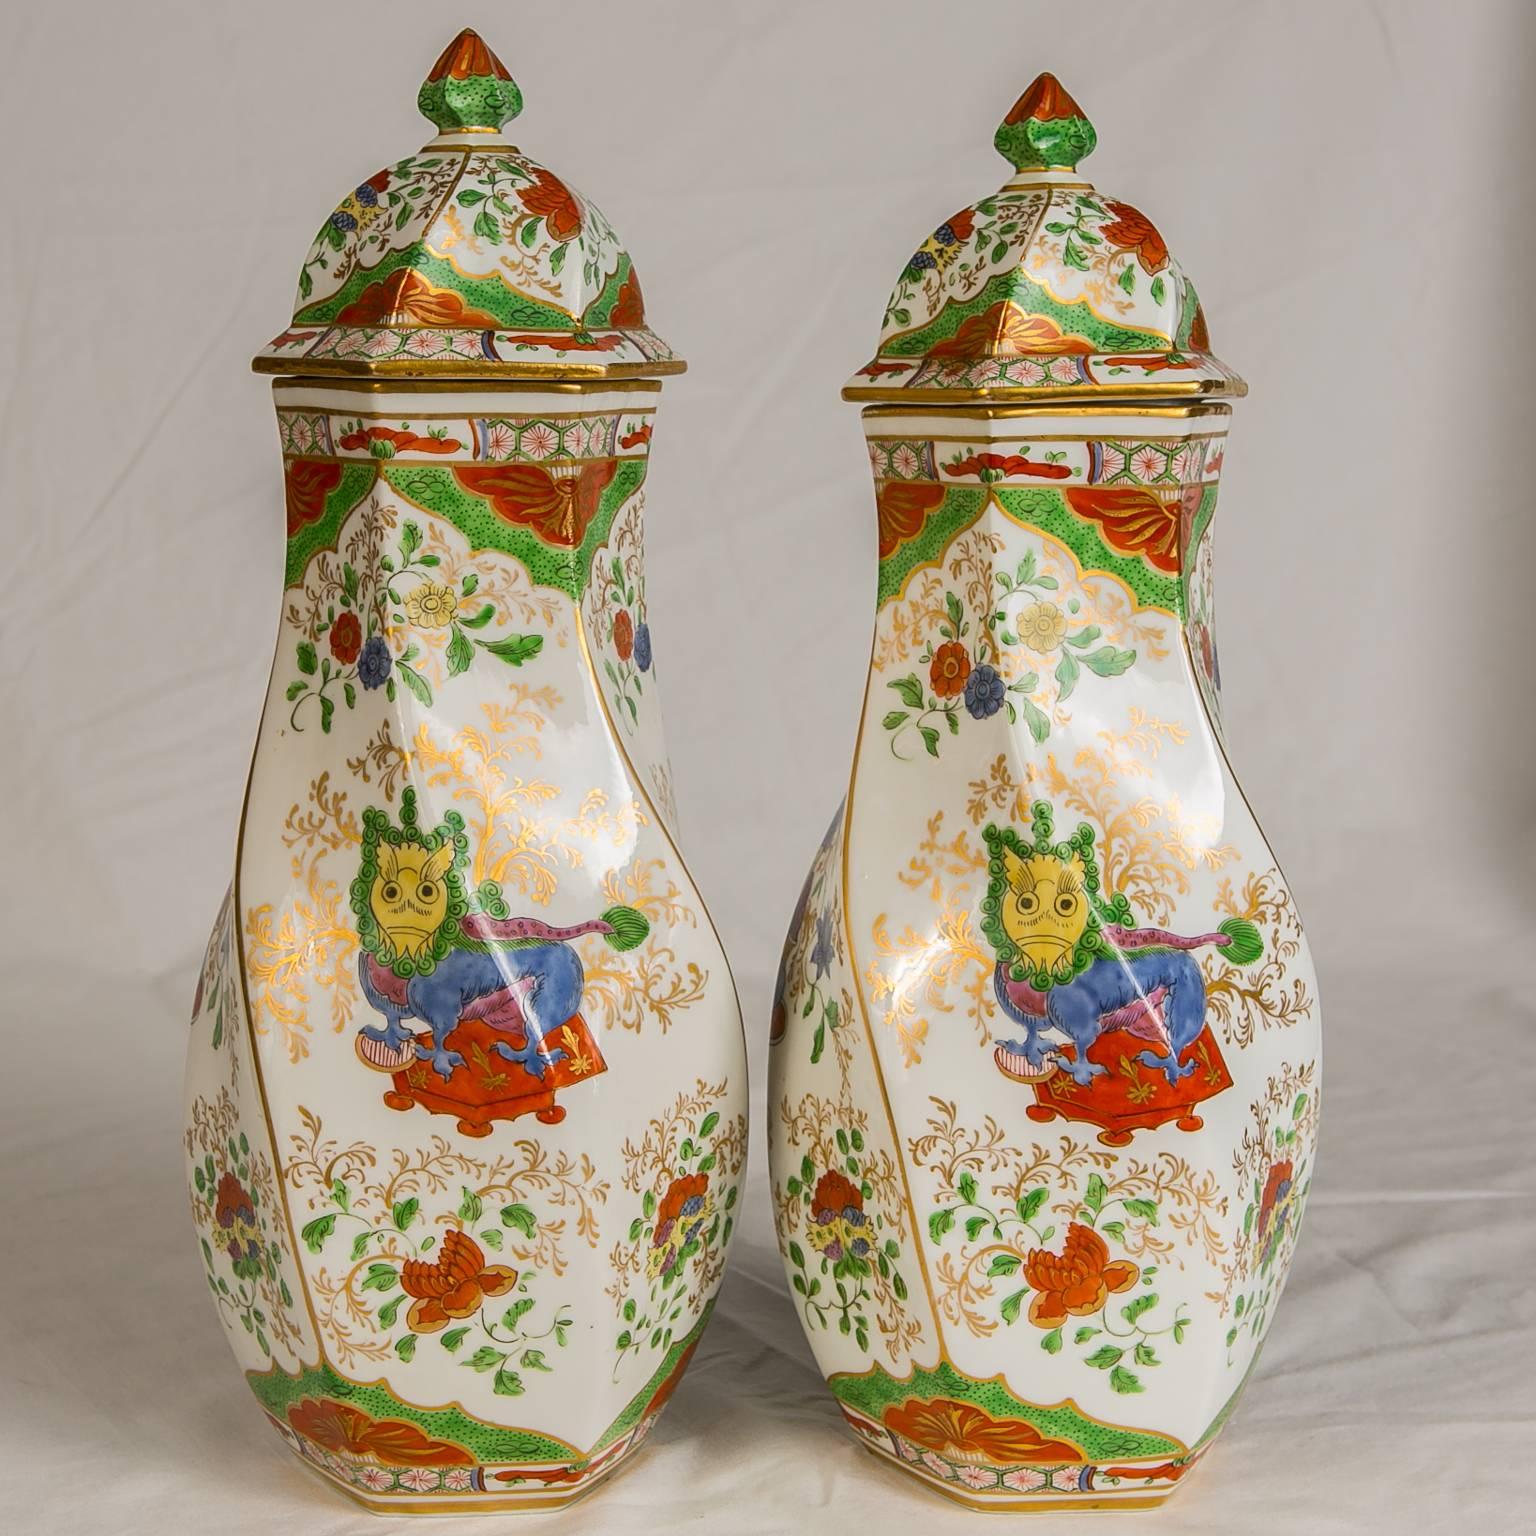 This is a rare pair of hexagonal vases decorated with a very popular pattern known as Bengal Tiger, also known as Dragon in Compartments, and Kylin in Compartments. It is an exotic pattern originally made on 18th century Chinese export porcelains.